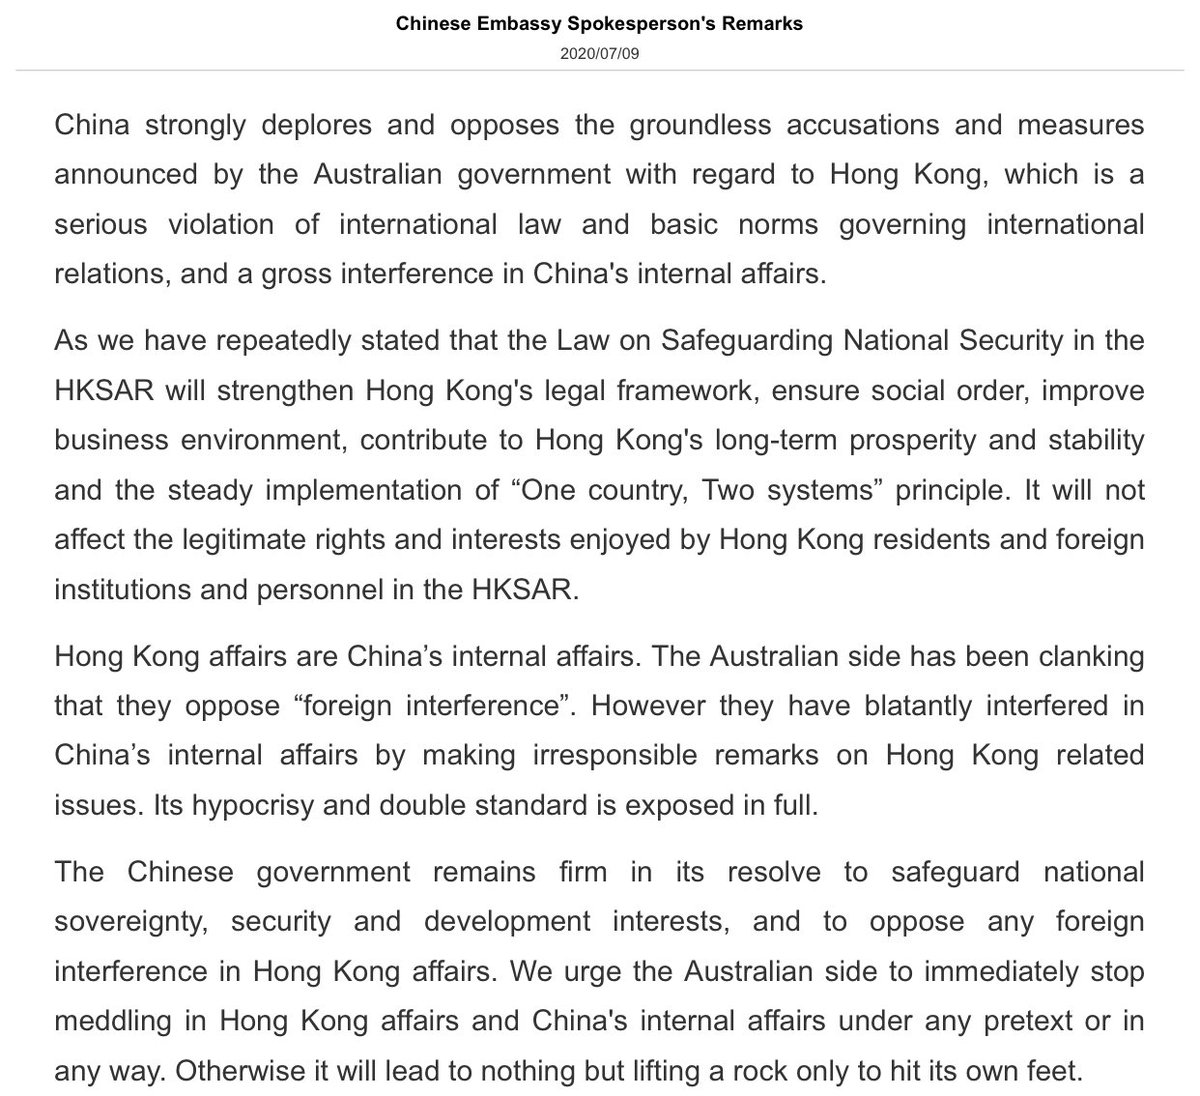  #China’s embassy in  #Canberra “strongly deplores and opposes the groundless accusations and measures announced by the Australian government with regard to  #HongKong, which is a serious violation of international law and basic norms governing”  #auspol  @SBSNews